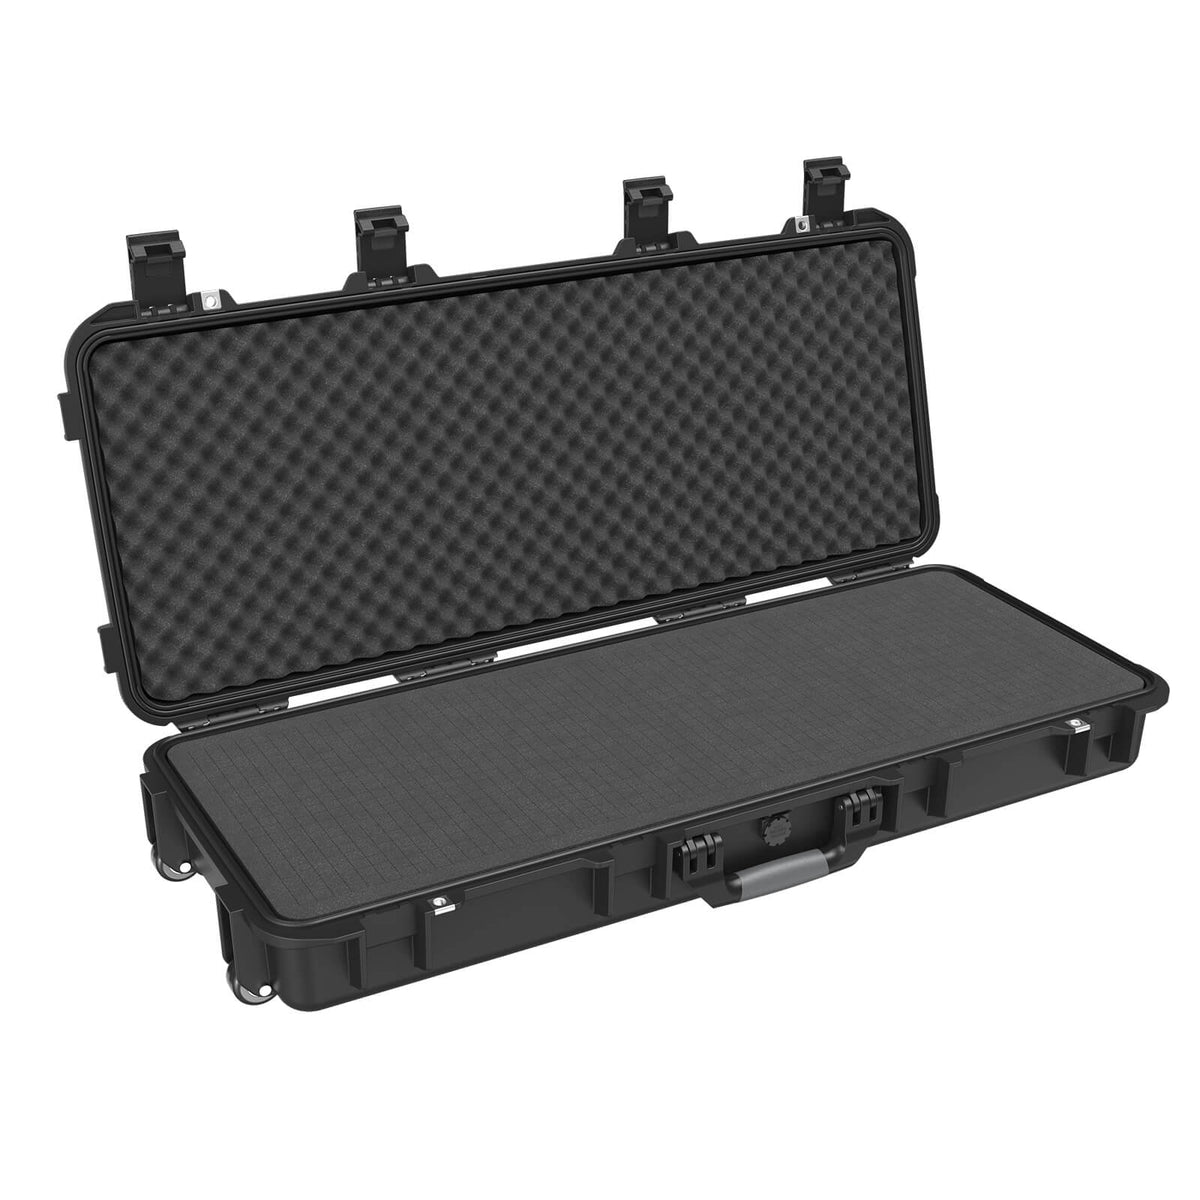 RPNB PP-91139 Rifle Case Armadillo Safe and Vault